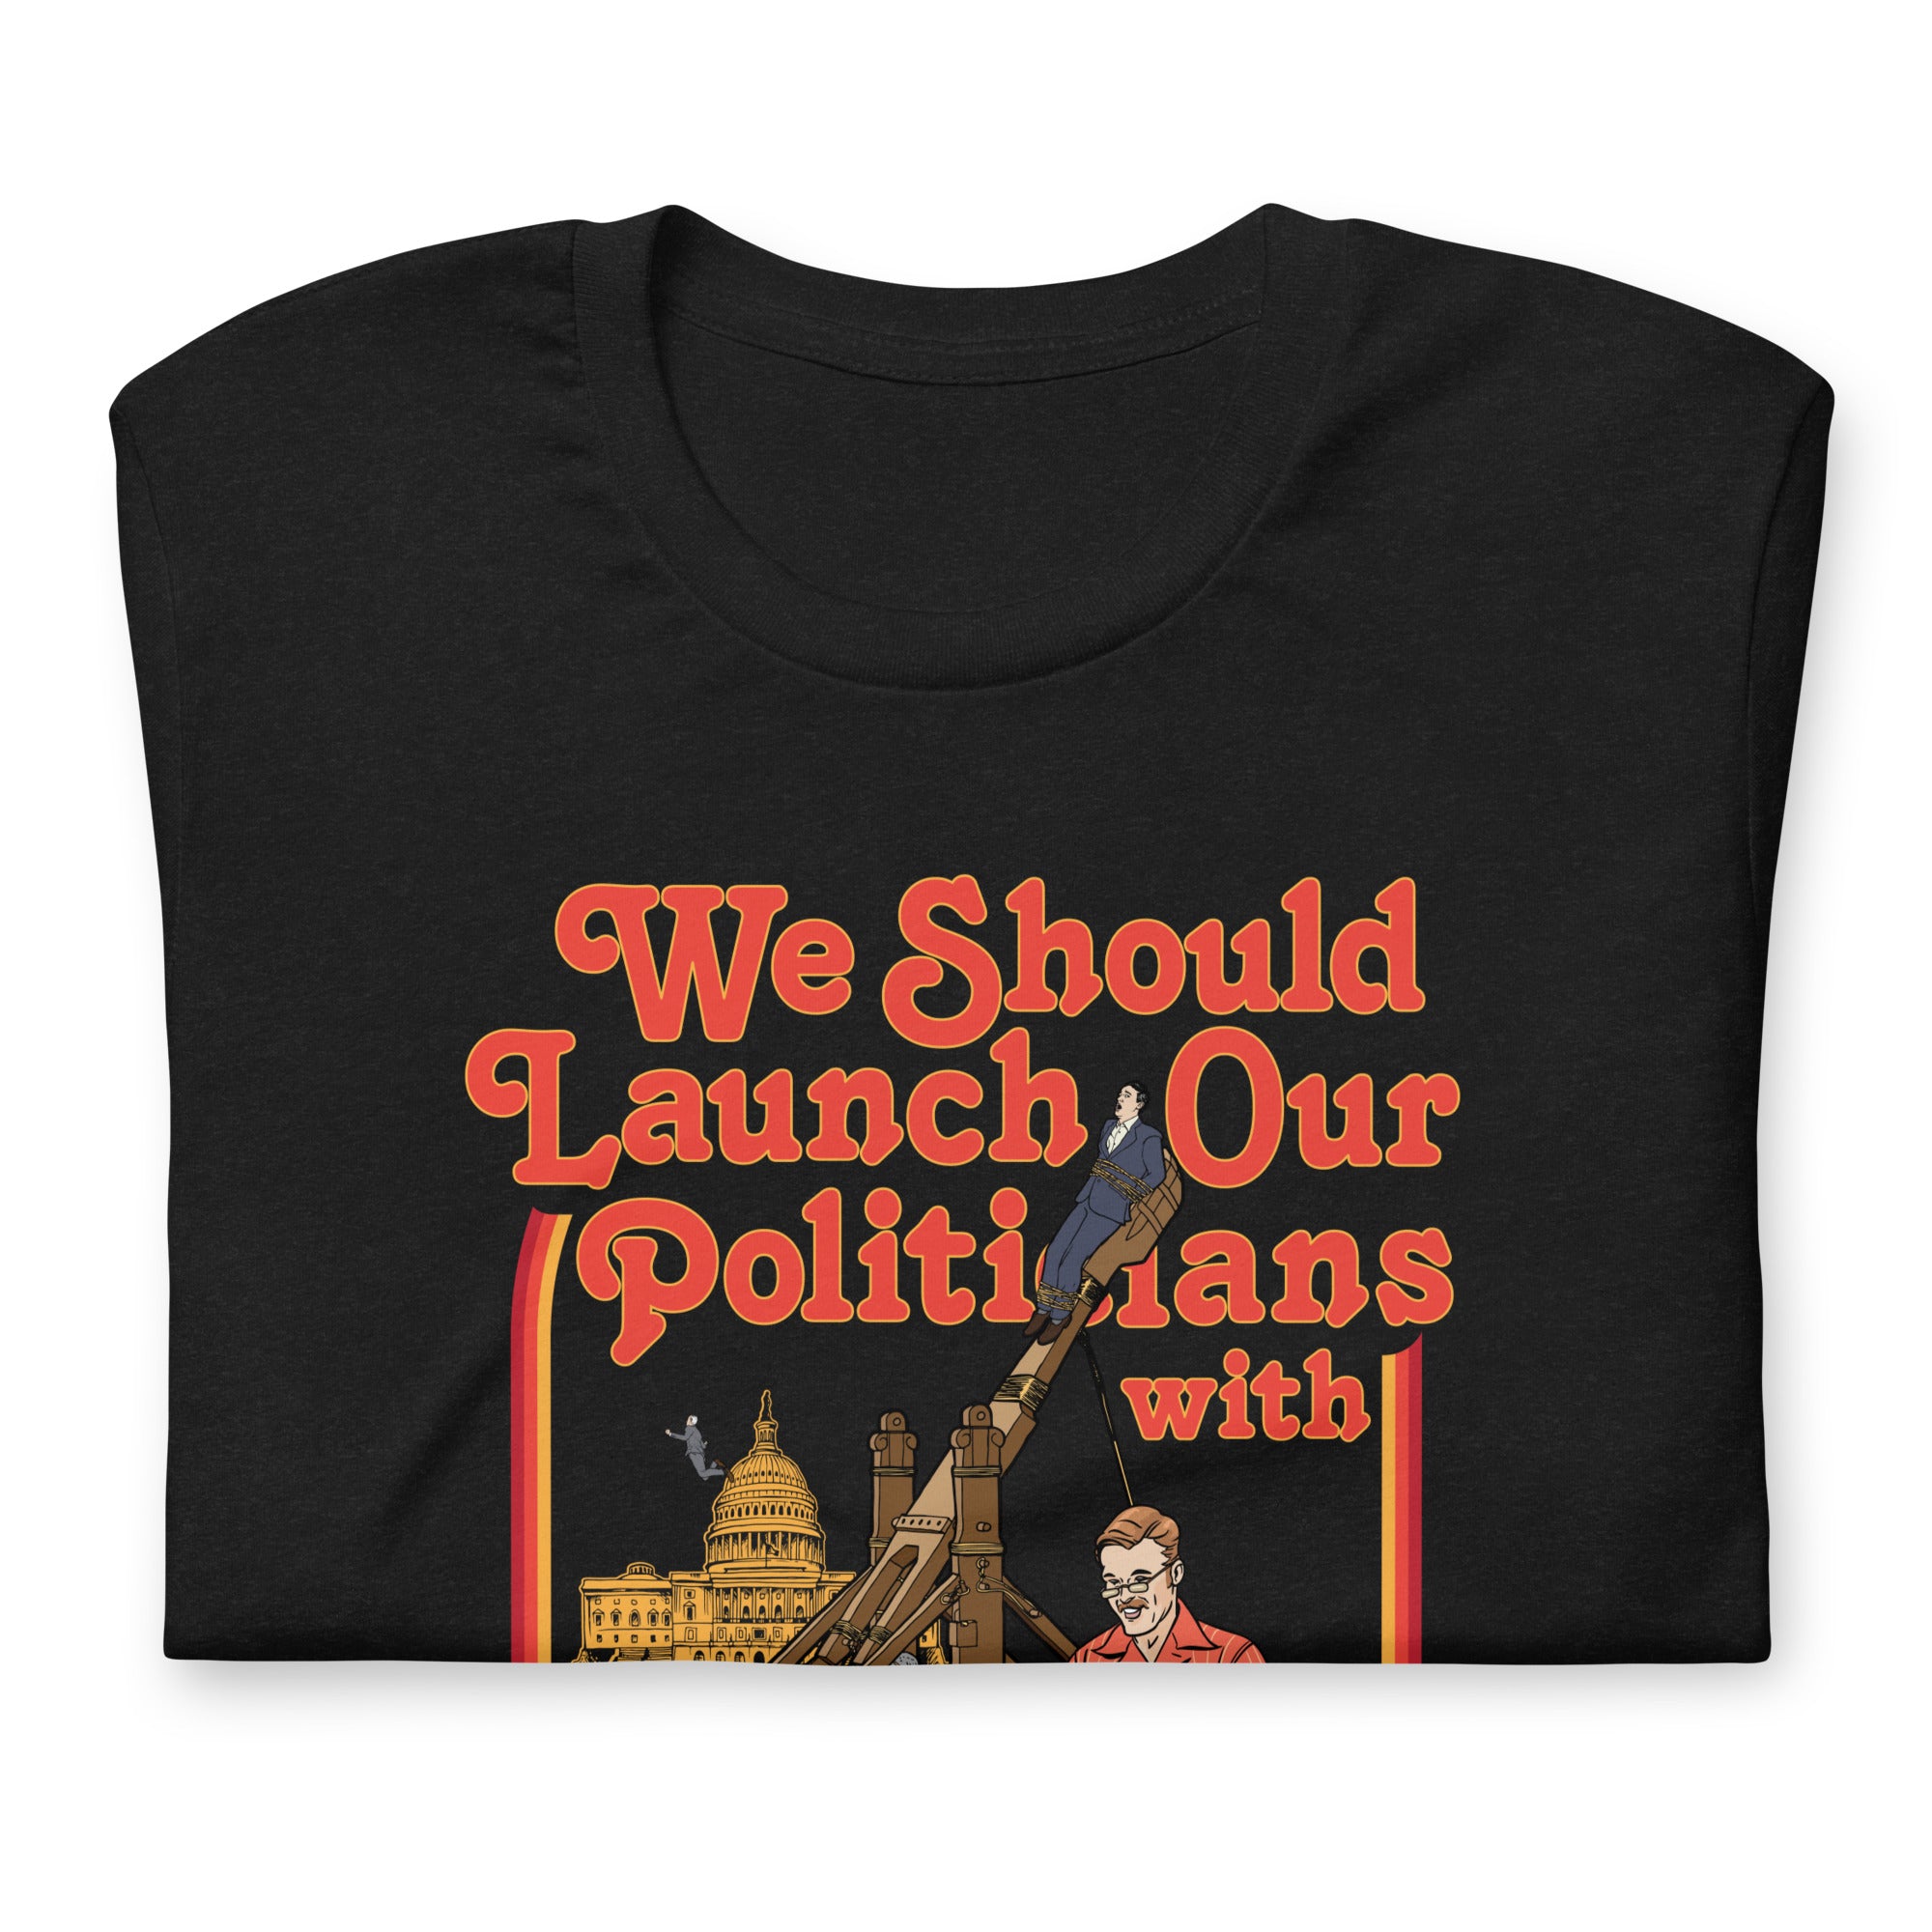 We Should Launch Our Politicians with Homemade Catapults T-Shirt